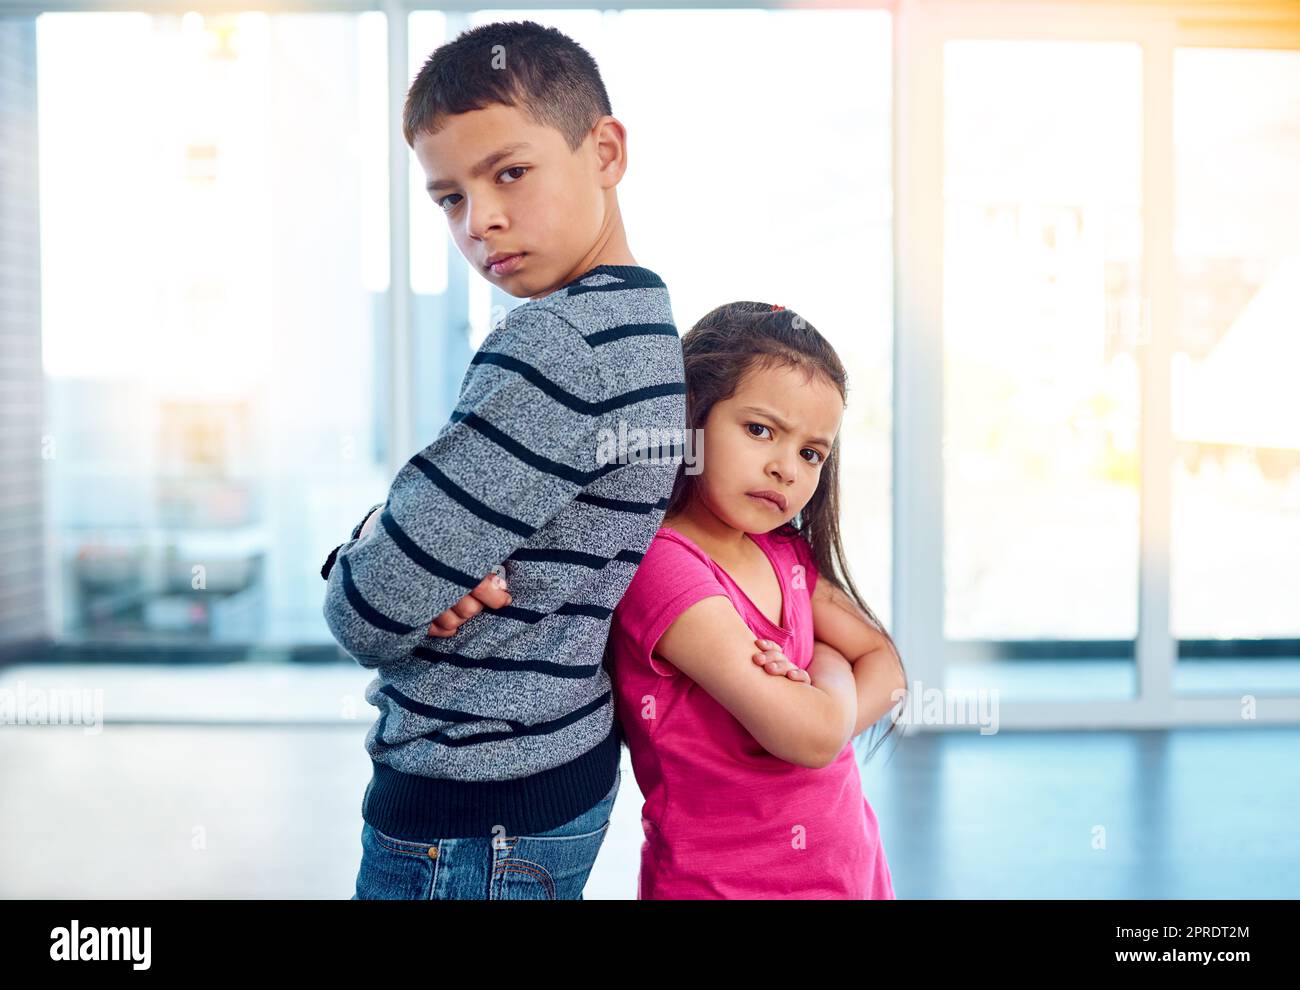 Theyre up to no good. Portrait of two naughty young children posing with their arms folded and backs facing each other at home. Stock Photo